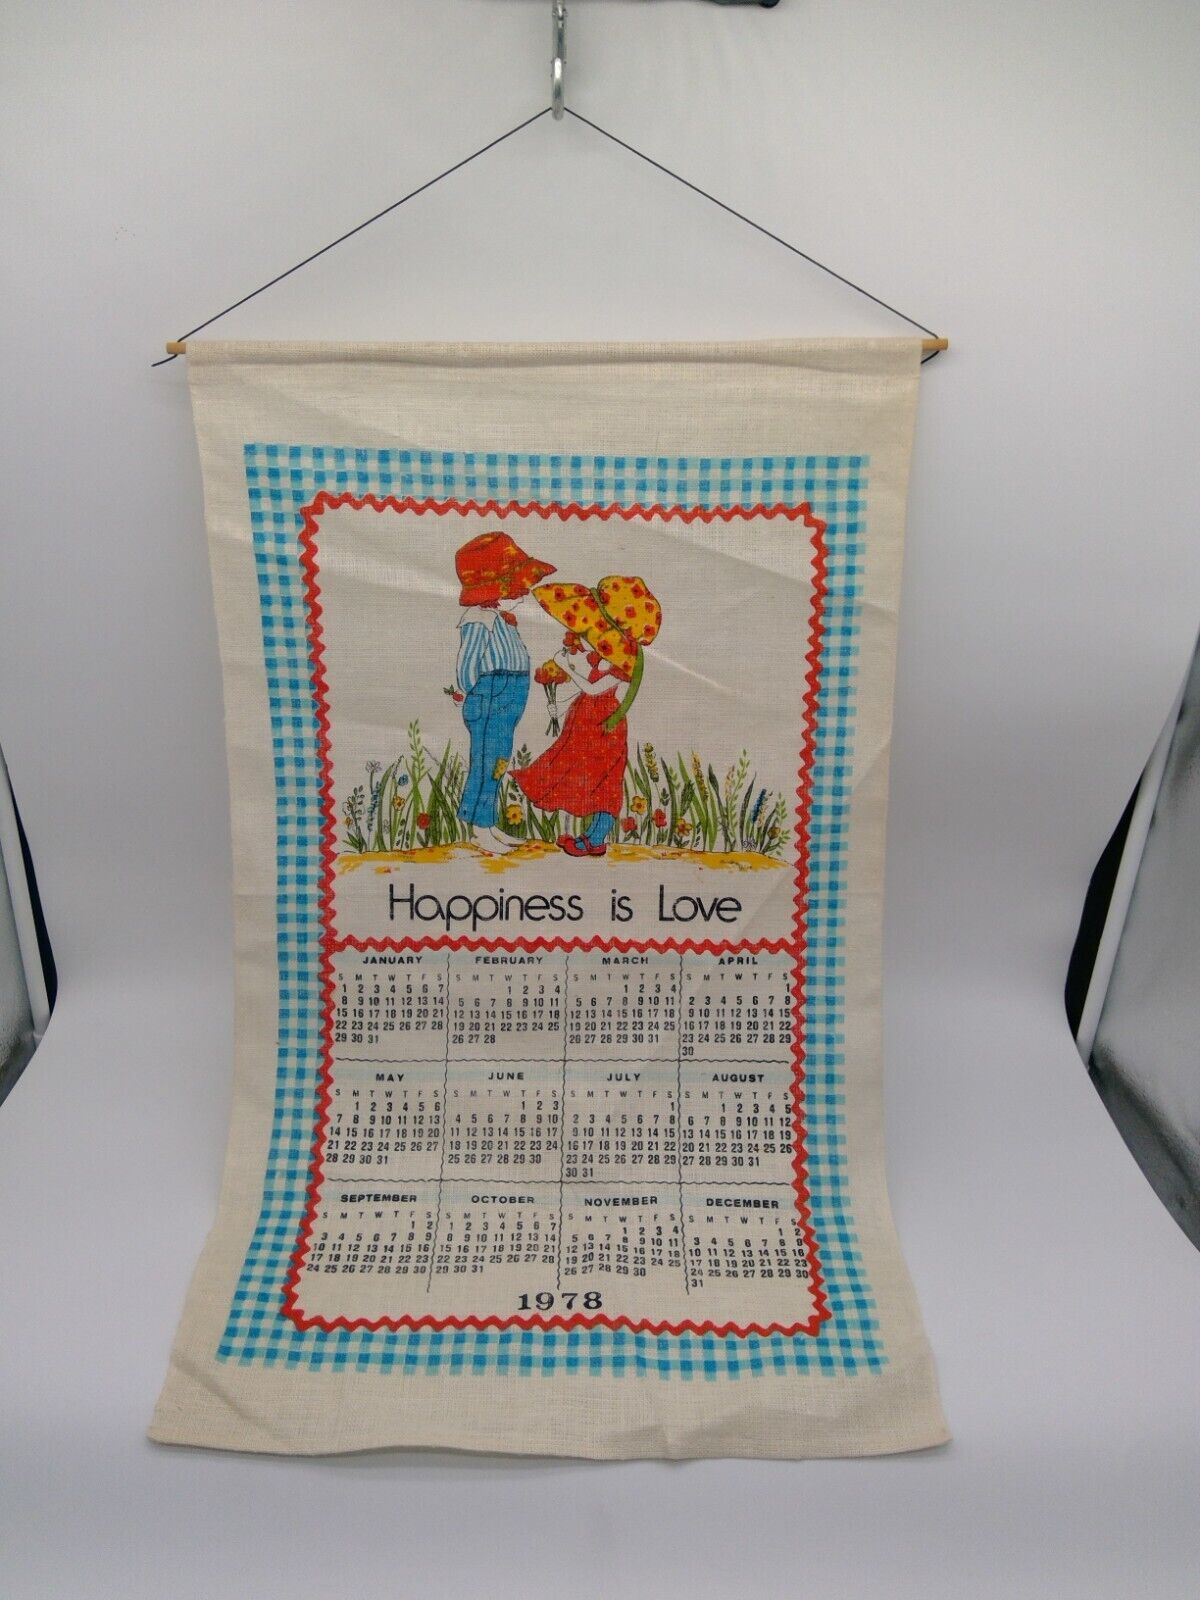 1978 -  Hanging Tea Towel Calendar - Happiness Is Love - Red/Blue - See Photos